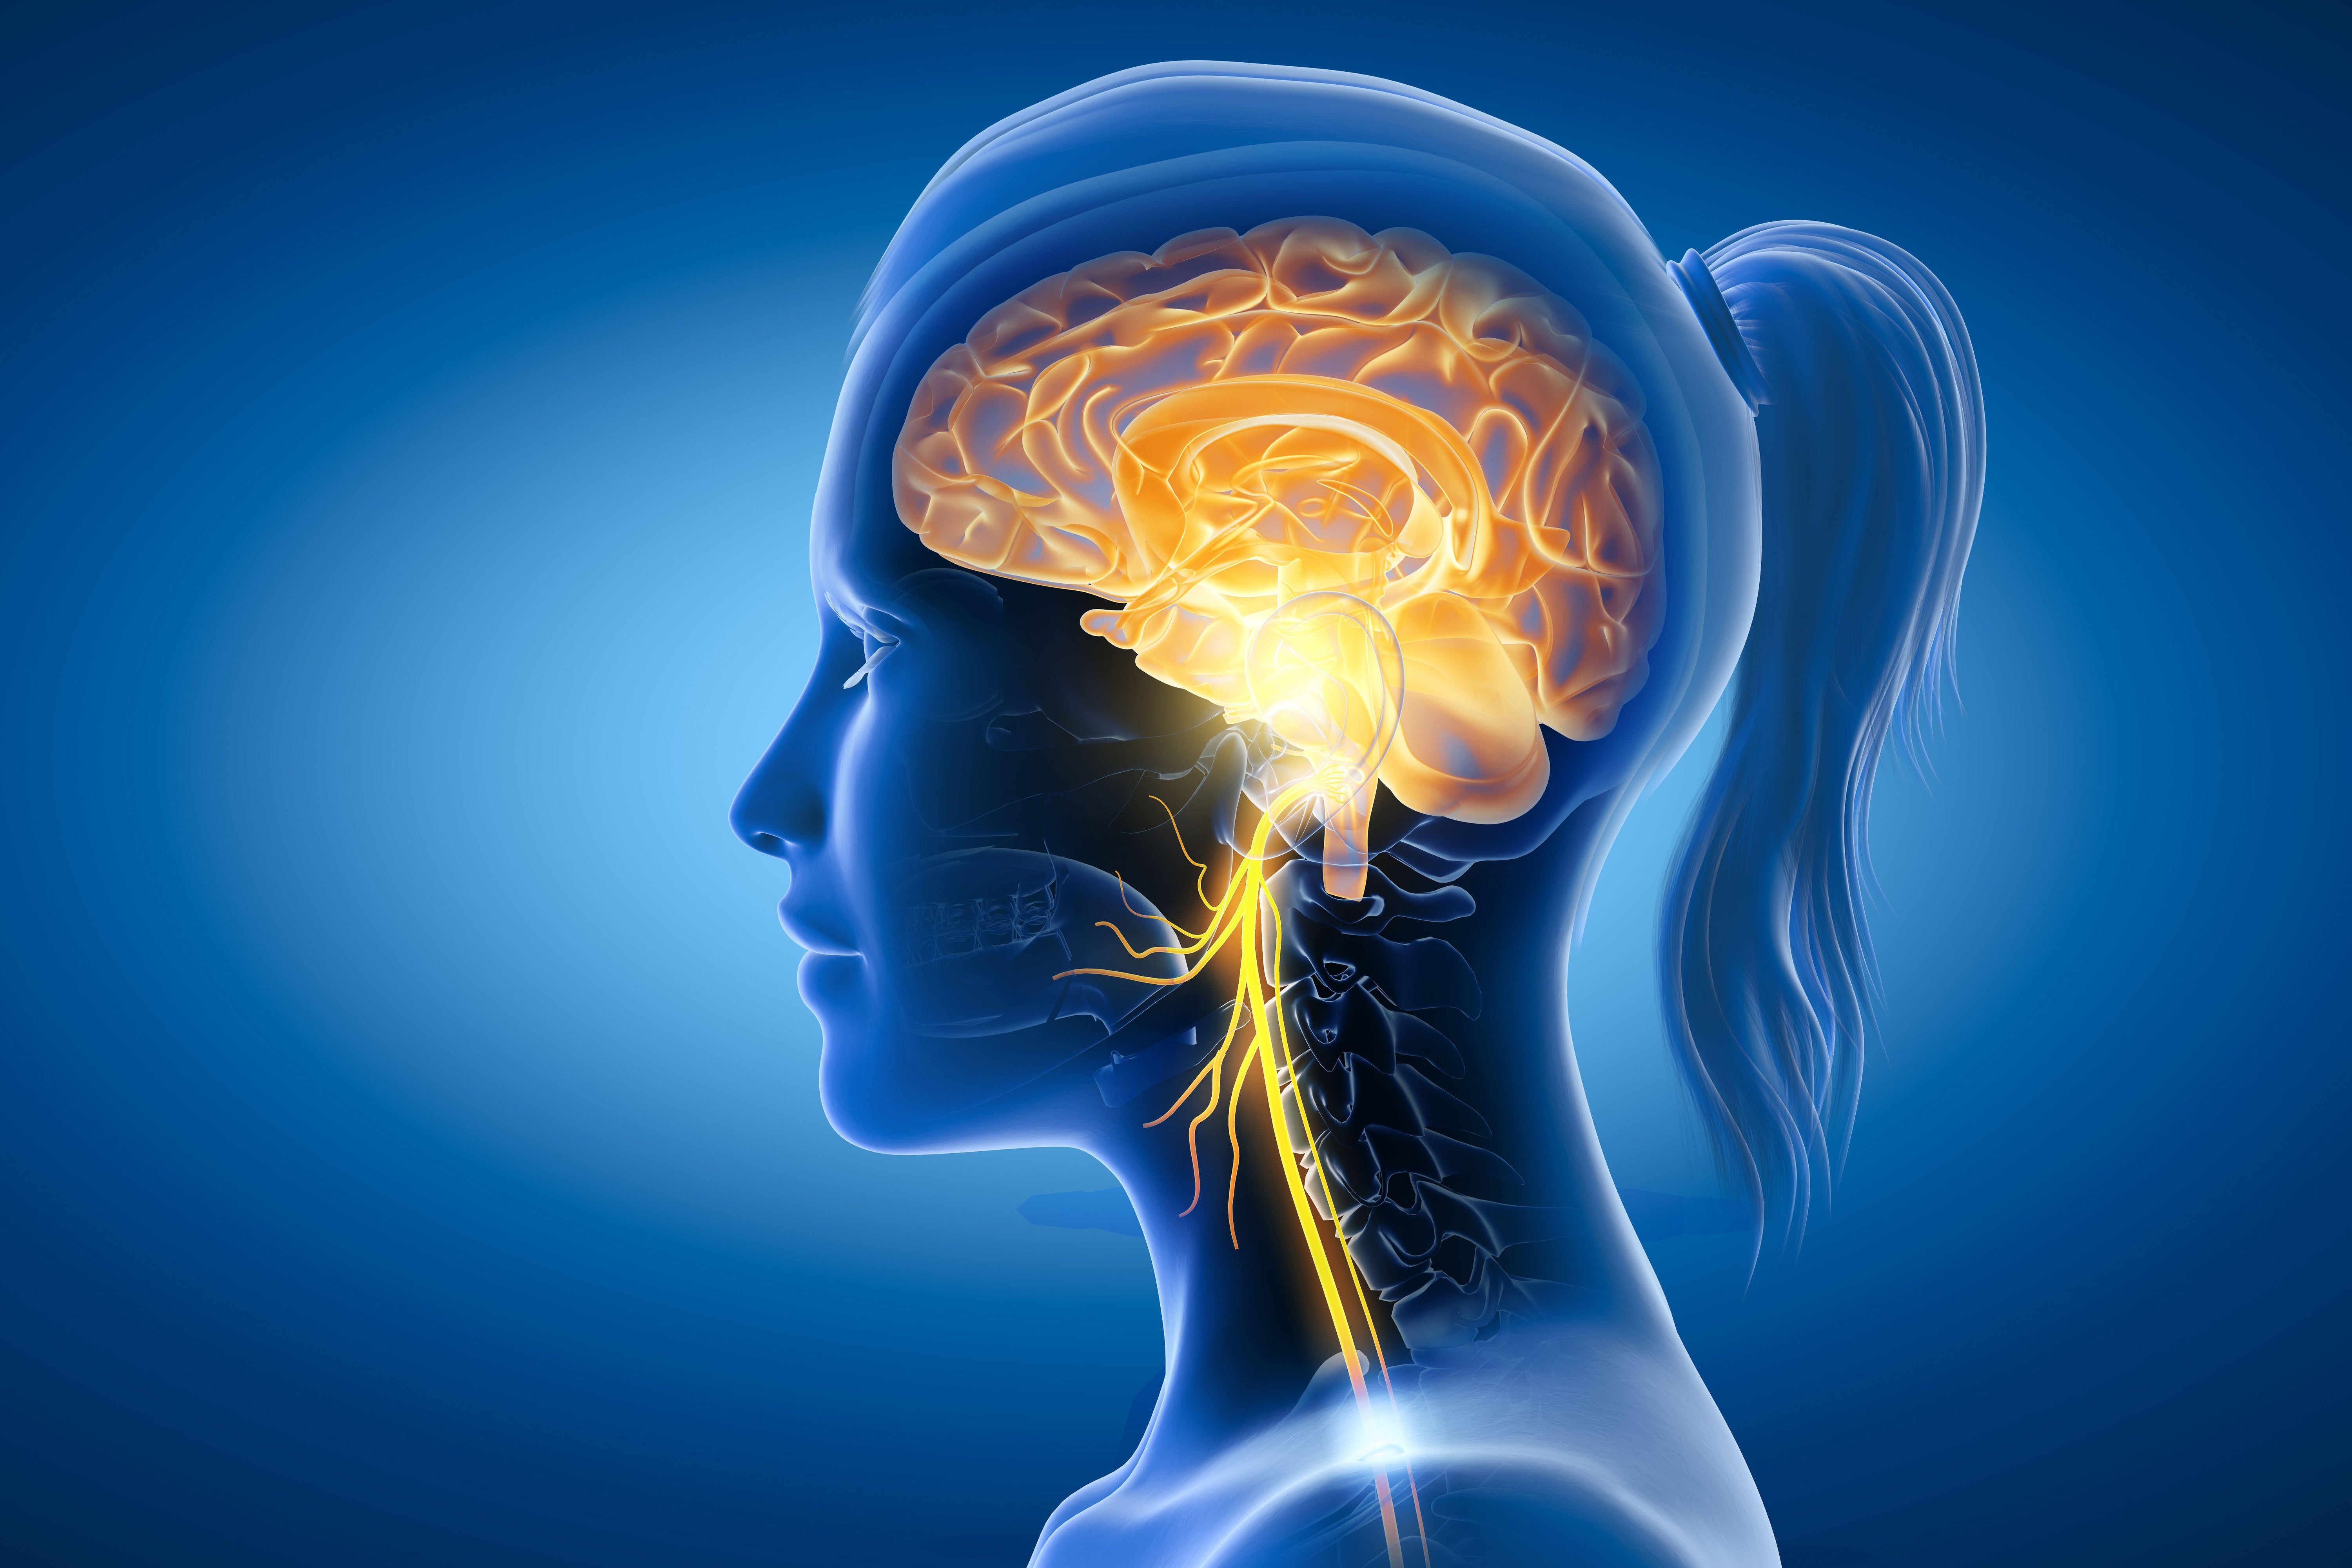 What Is Vagus Nerve Stimulation For? - Scientific American